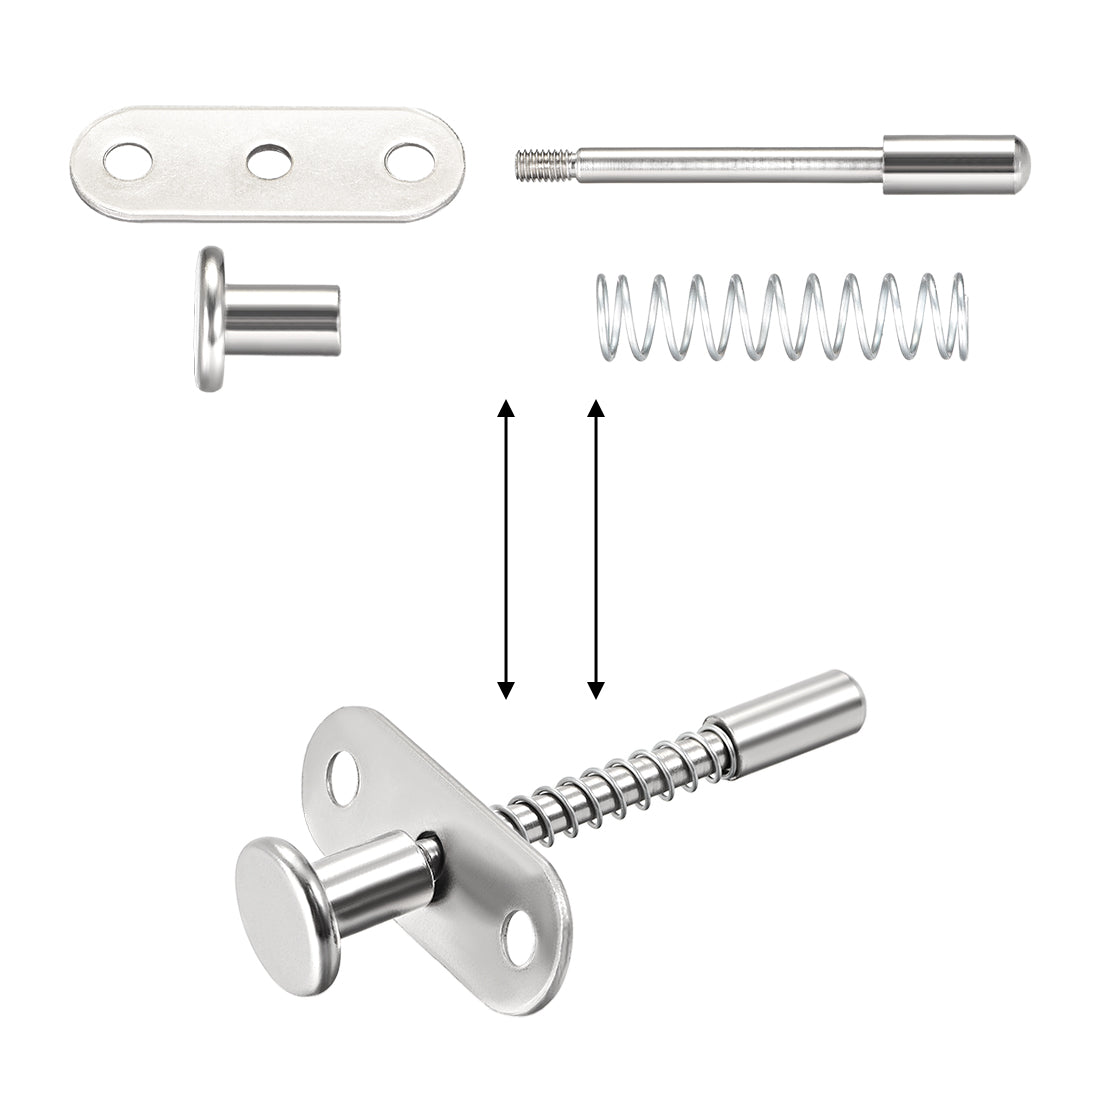 uxcell Uxcell Plunger Latches Spring-loaded Stainless Steel 7mm Dia Head 6mm Dia Spring 70mm Total Length , 4pcs